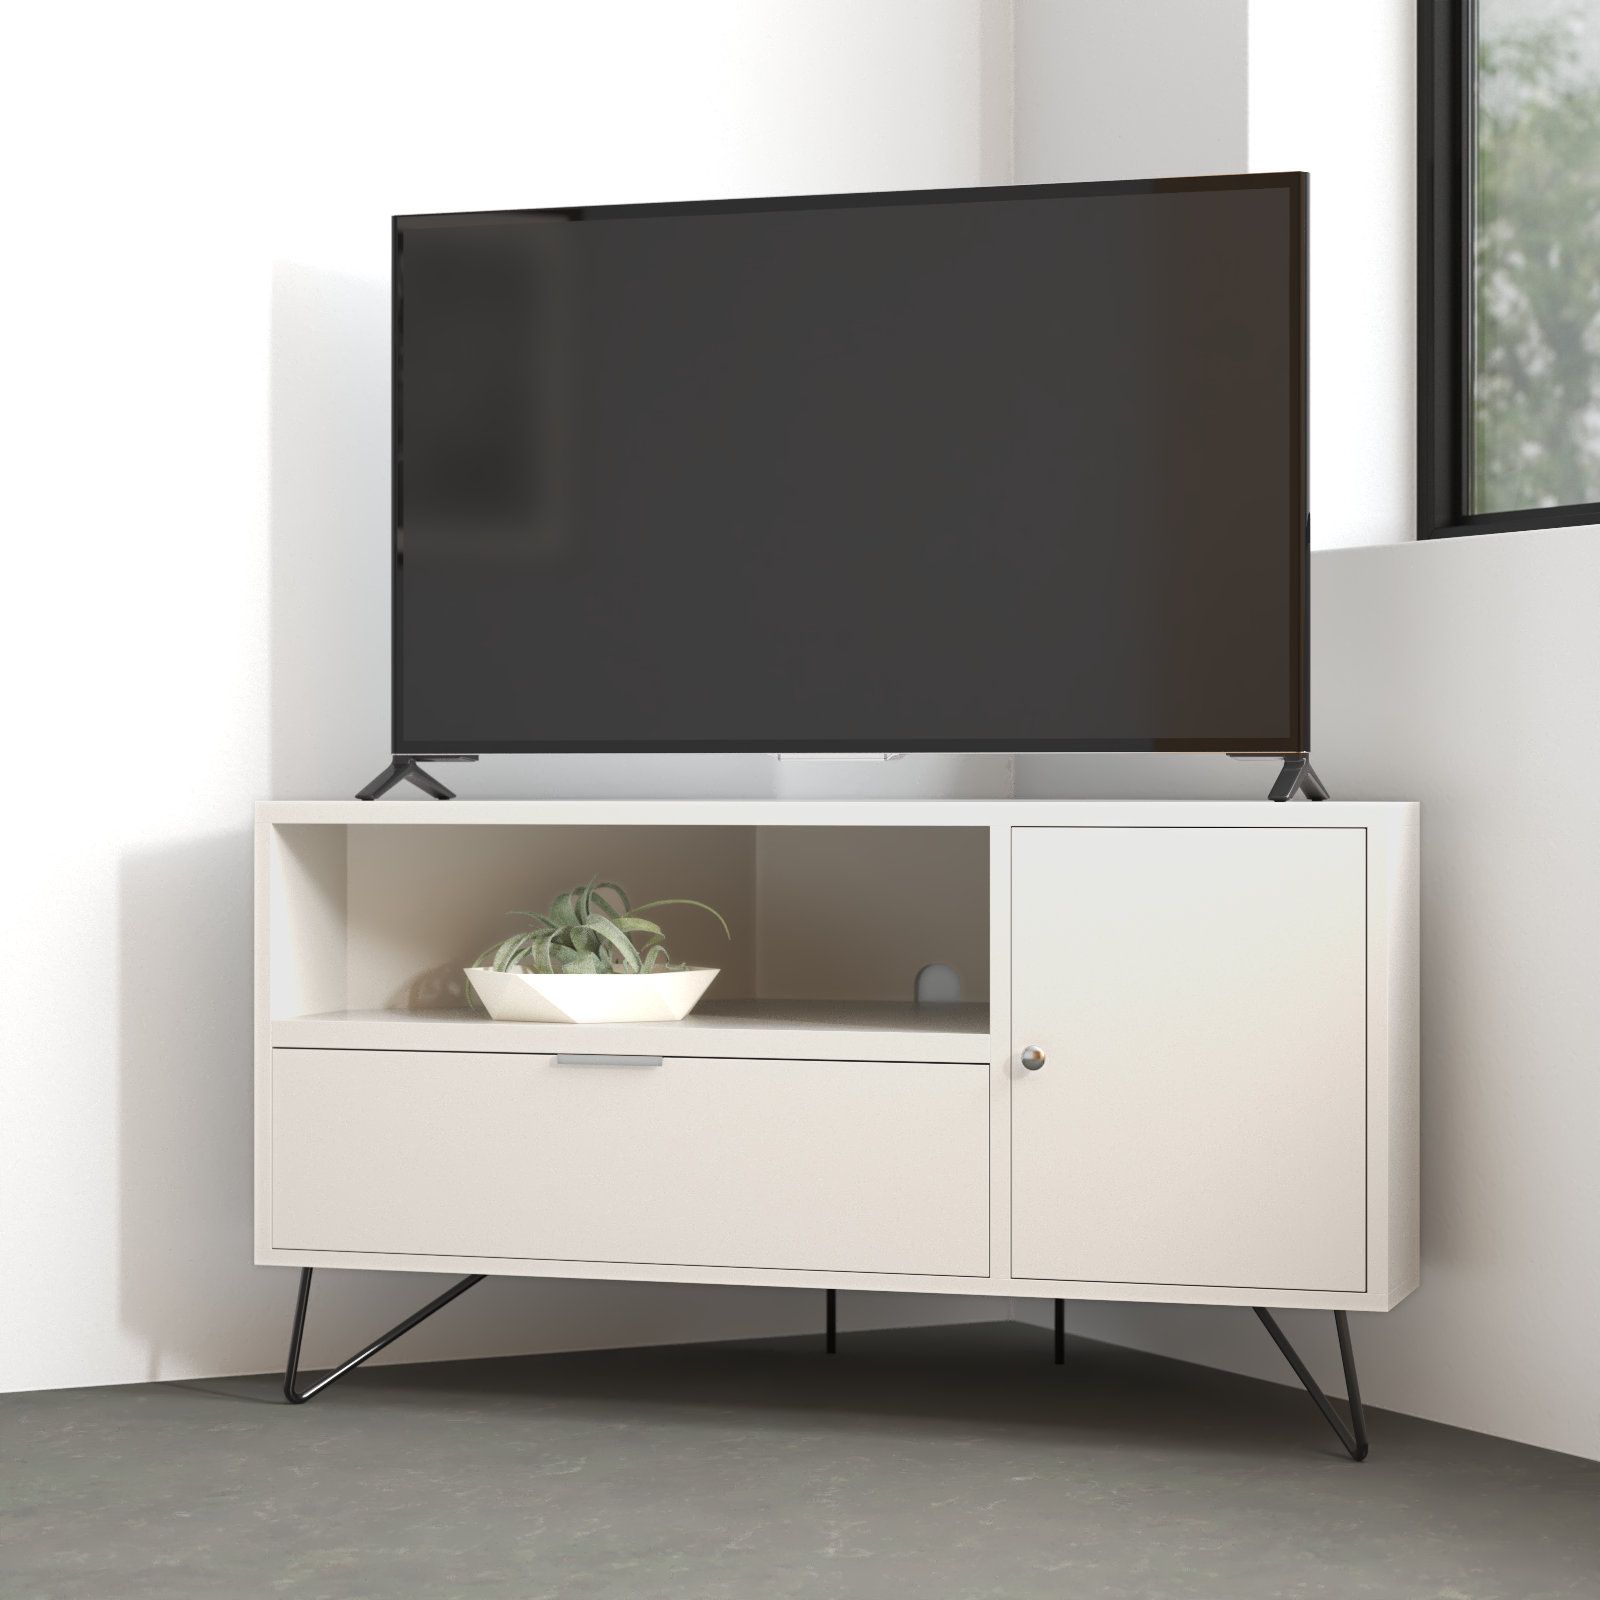 Wade Logan® Bayon 41'' Media Console & Reviews | Wayfair Pertaining To Romain Stands For Tvs (Gallery 13 of 20)